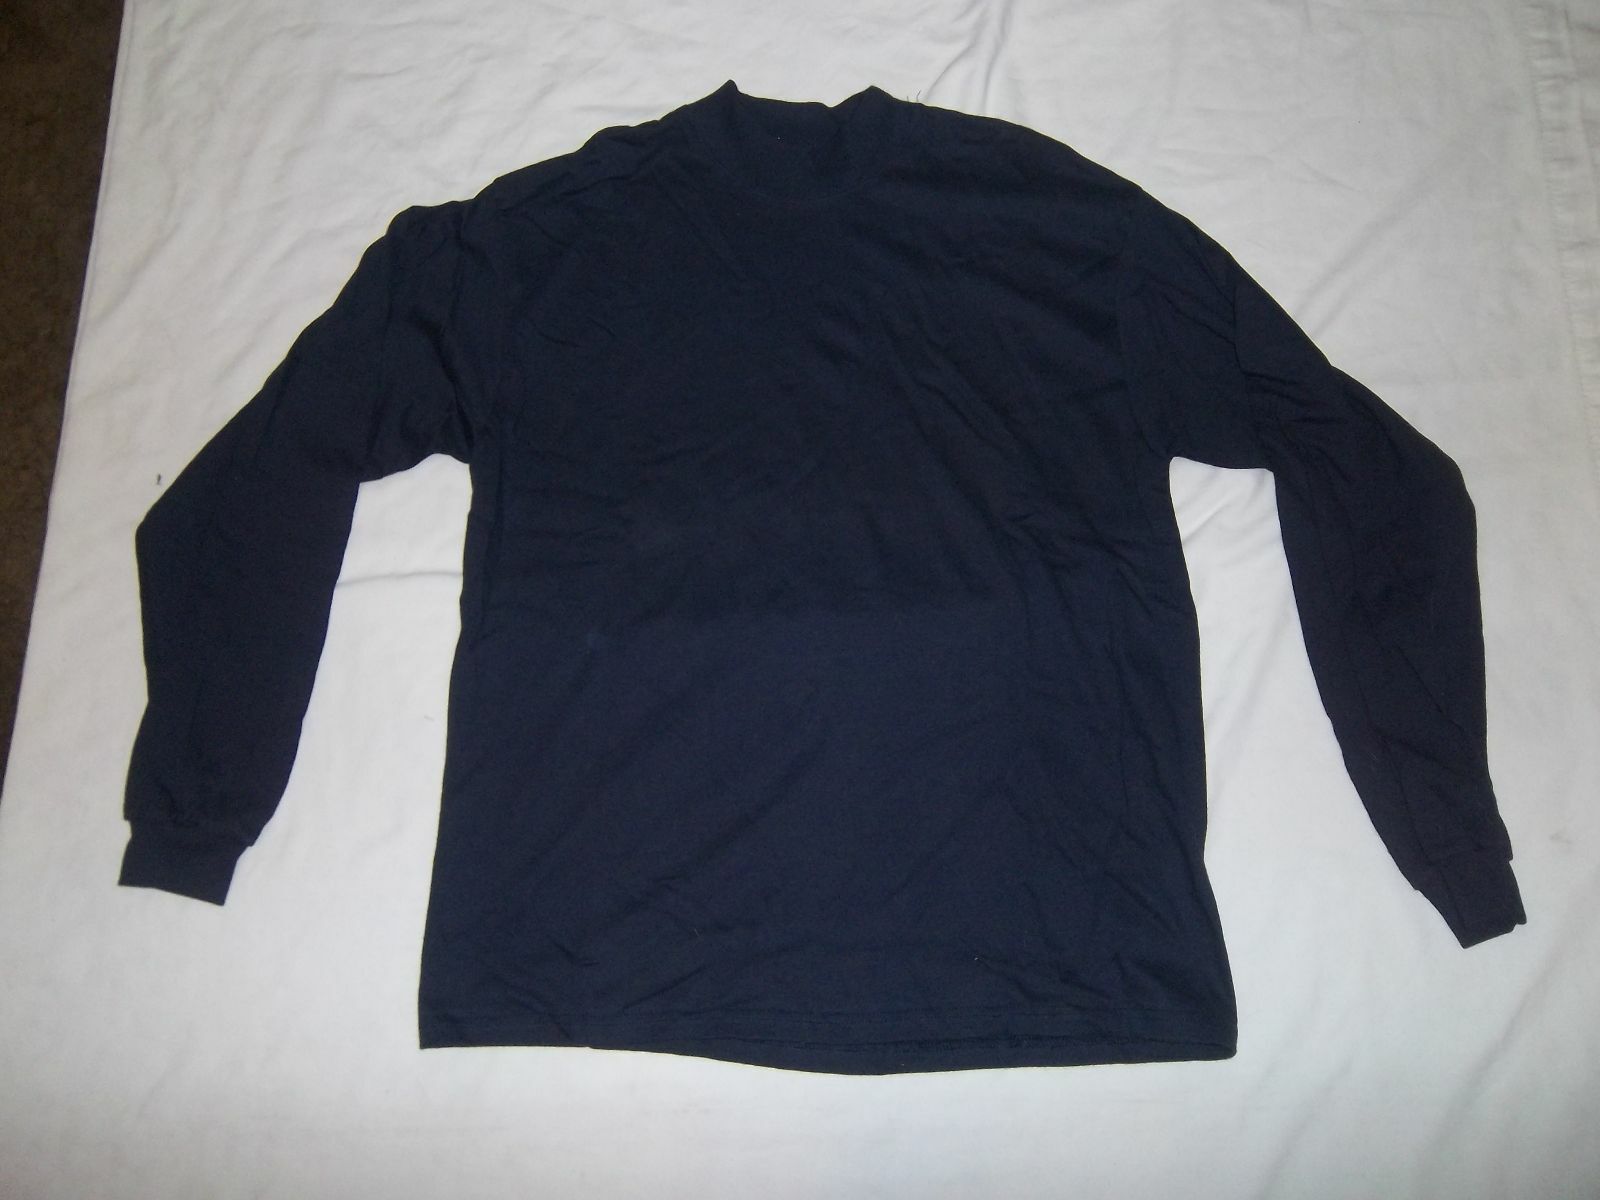 ANVIL MOCK TURTLE NECK LONG SLEEVE SHIRT (VARIOUS SIZES AND COLORS)